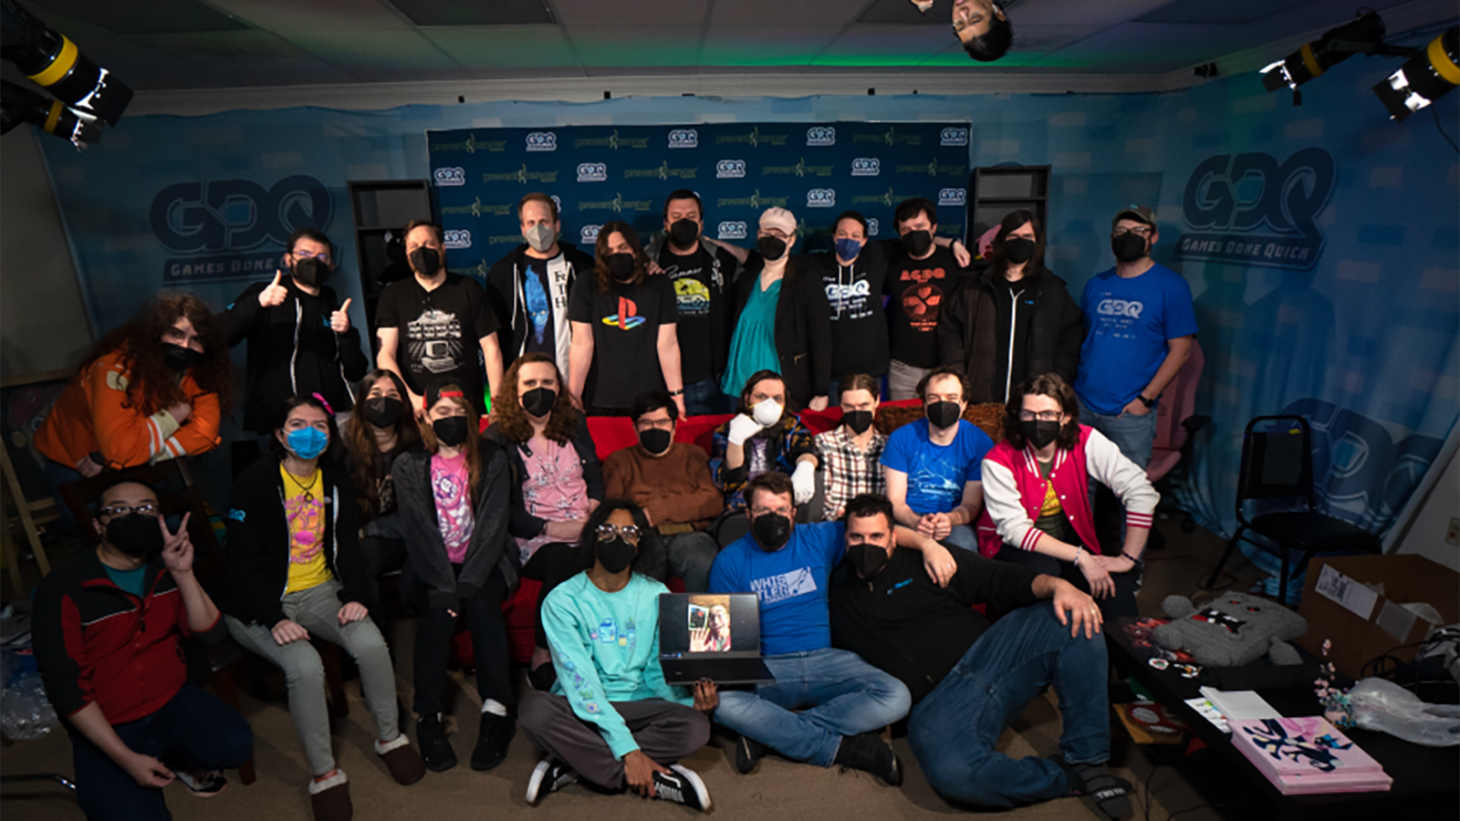 Awesome Games Done Quick 2023 Raises 2.6 Million For Cancer Research